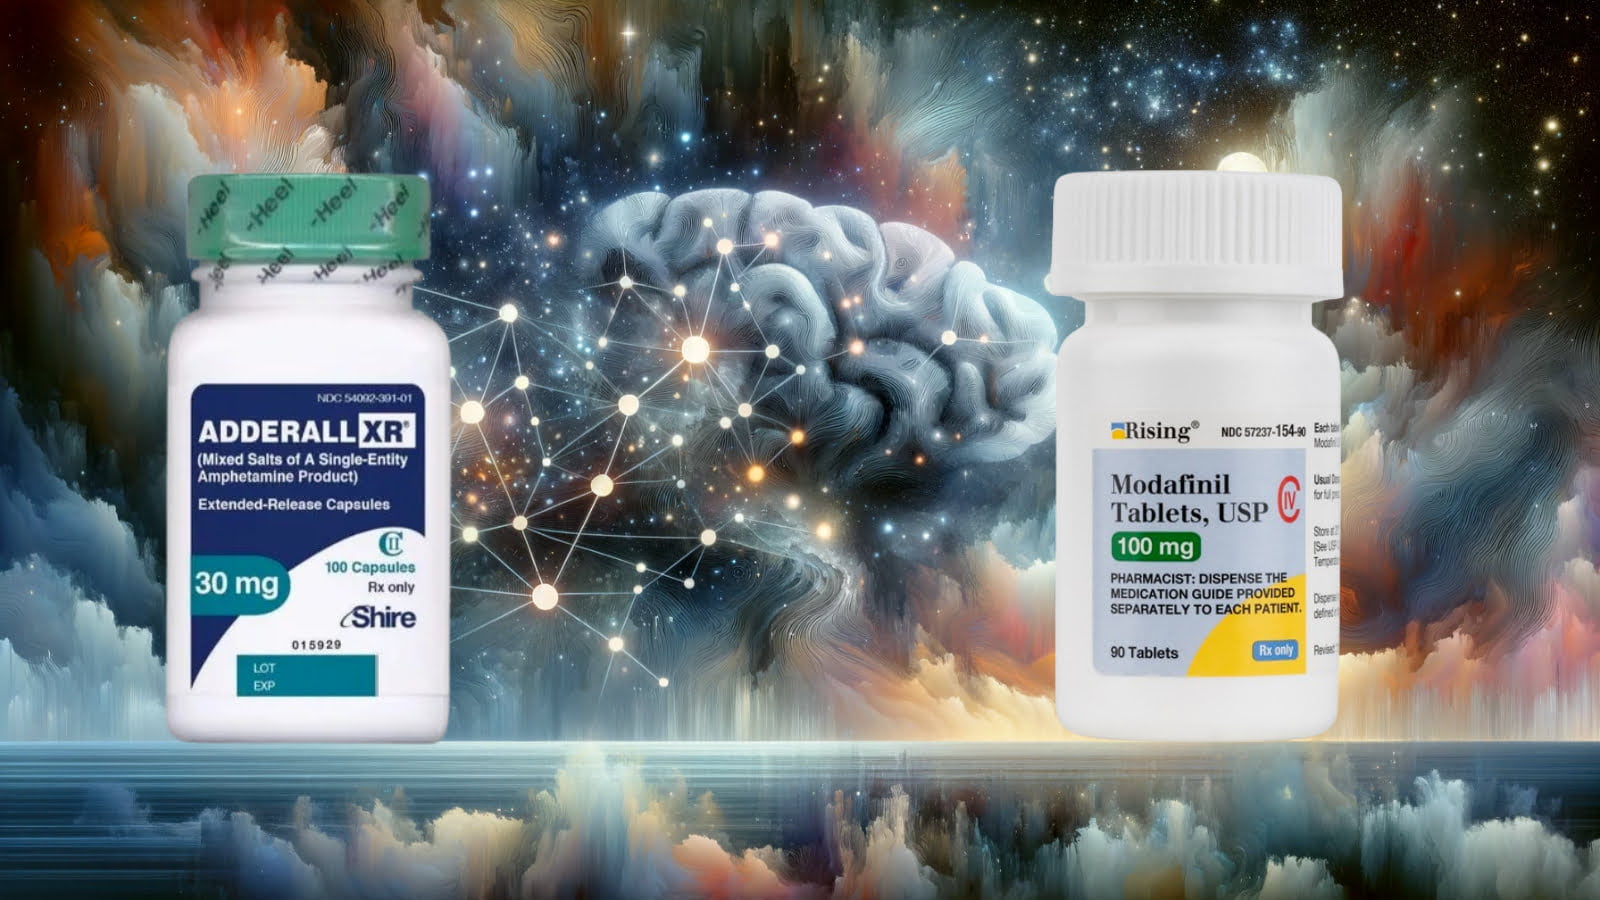 Abstract comparison of Modafinil and Adderall's effects on cognitive enhancement.